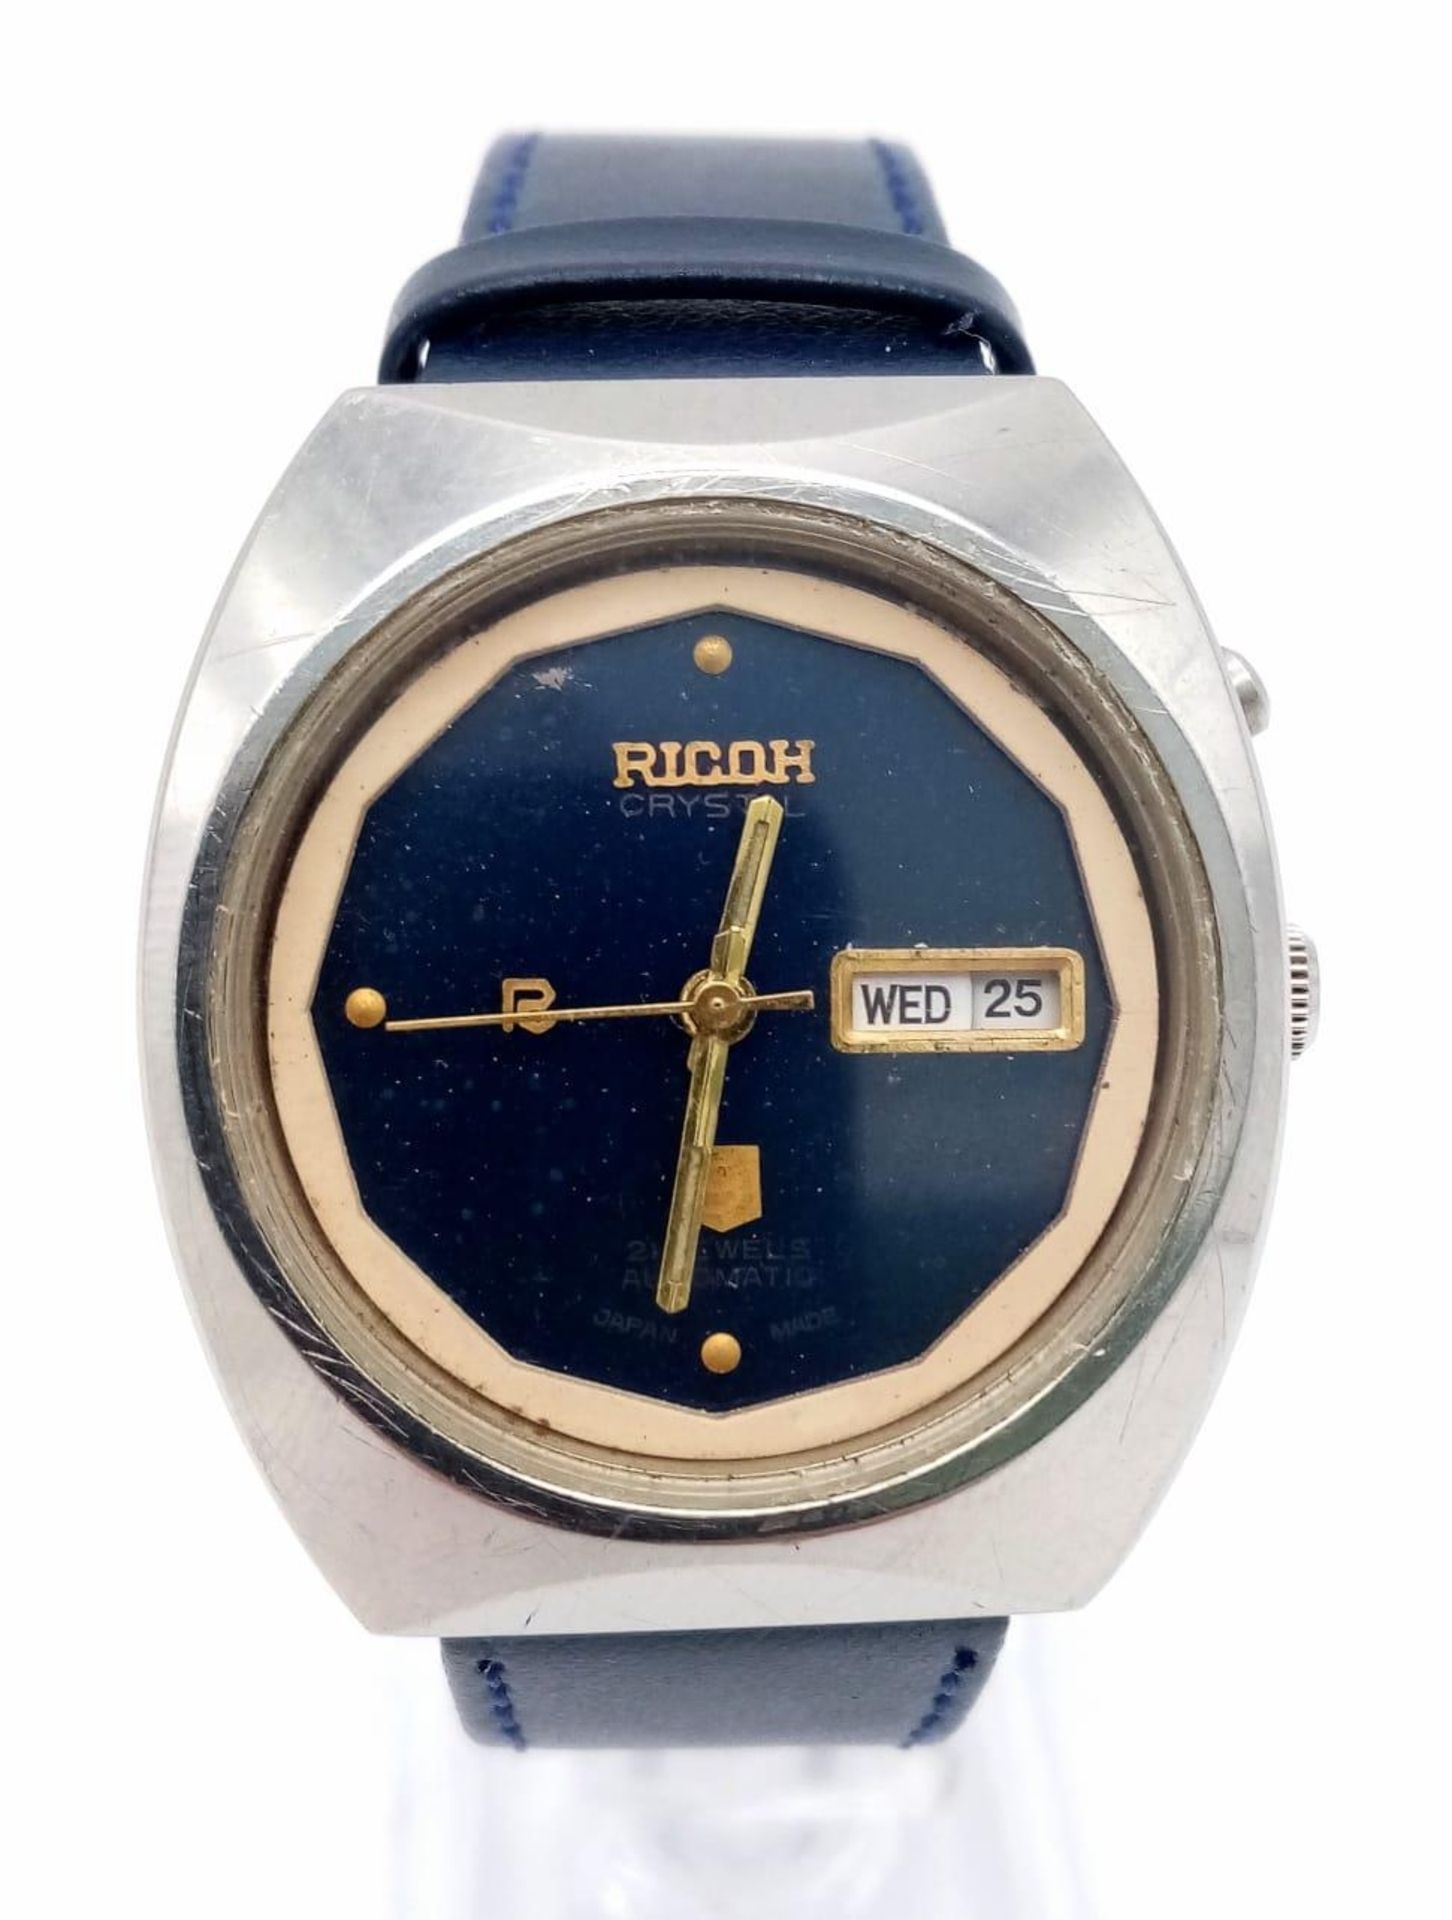 A Vintage Ricoh Automatic Gents Watch. Blue leather strap. Stainless steel case - 37mm. Blue dial - Image 2 of 12